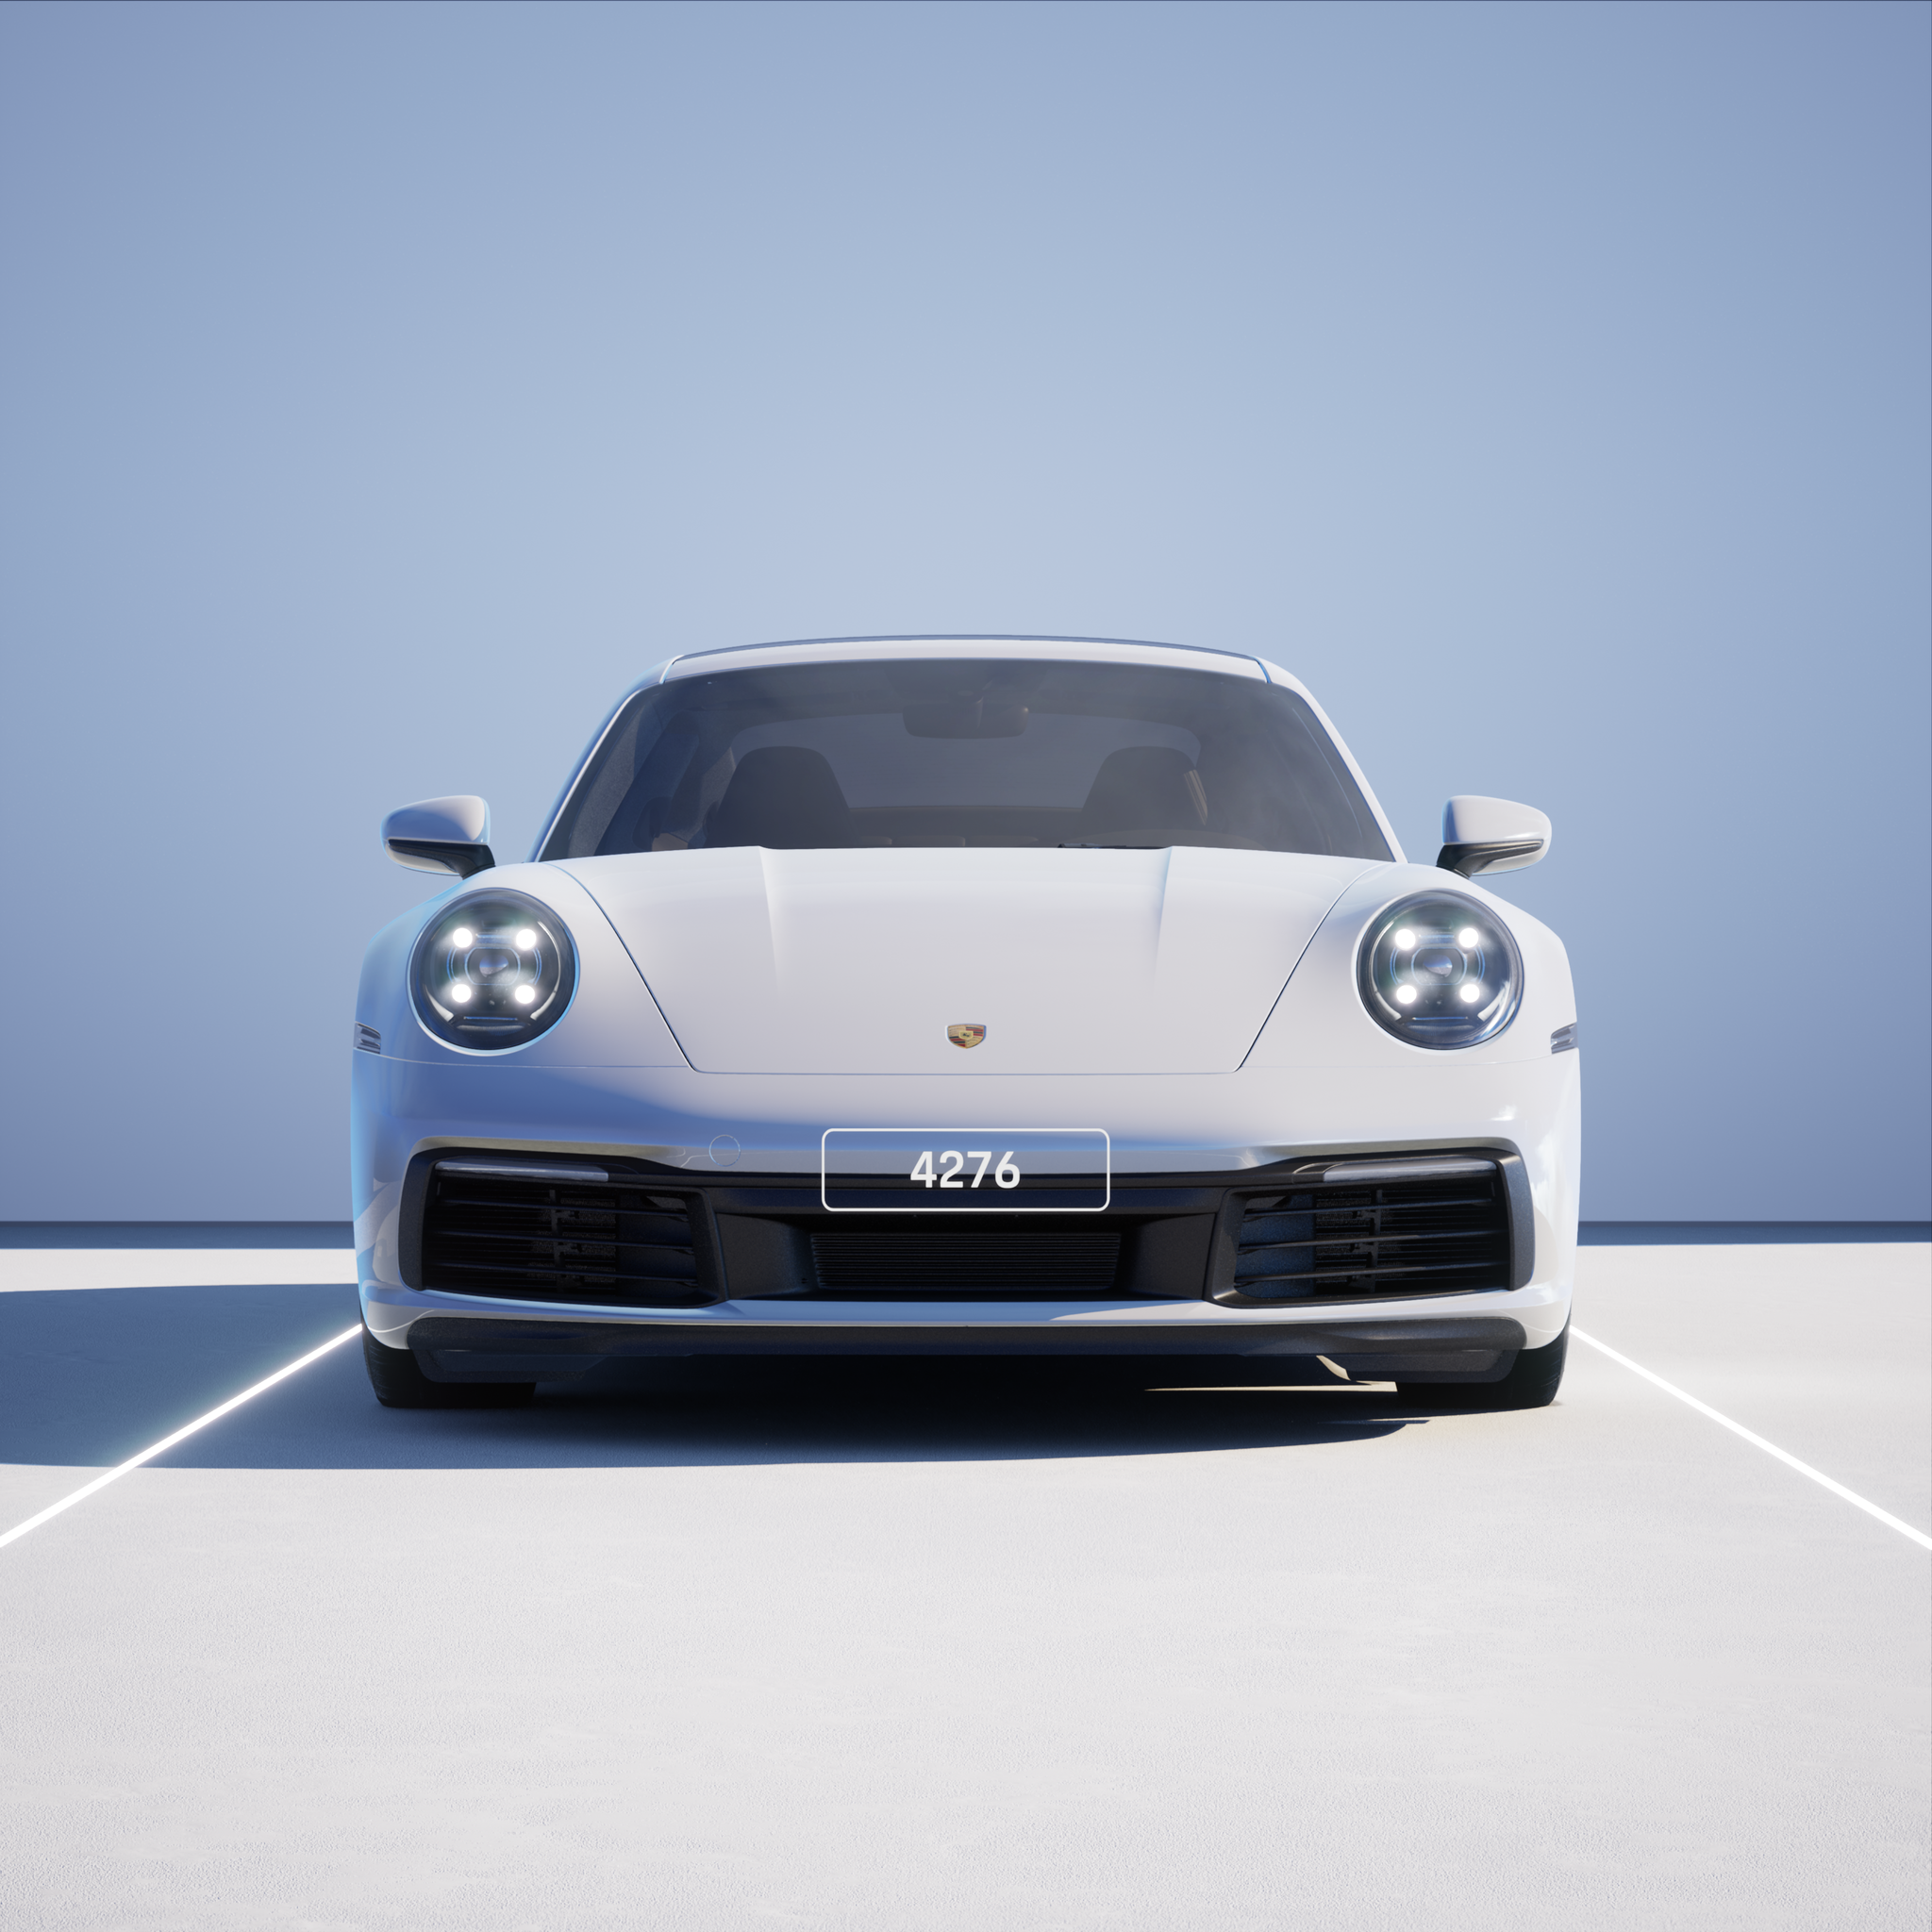 The PORSCHΞ 911 4276 image in phase